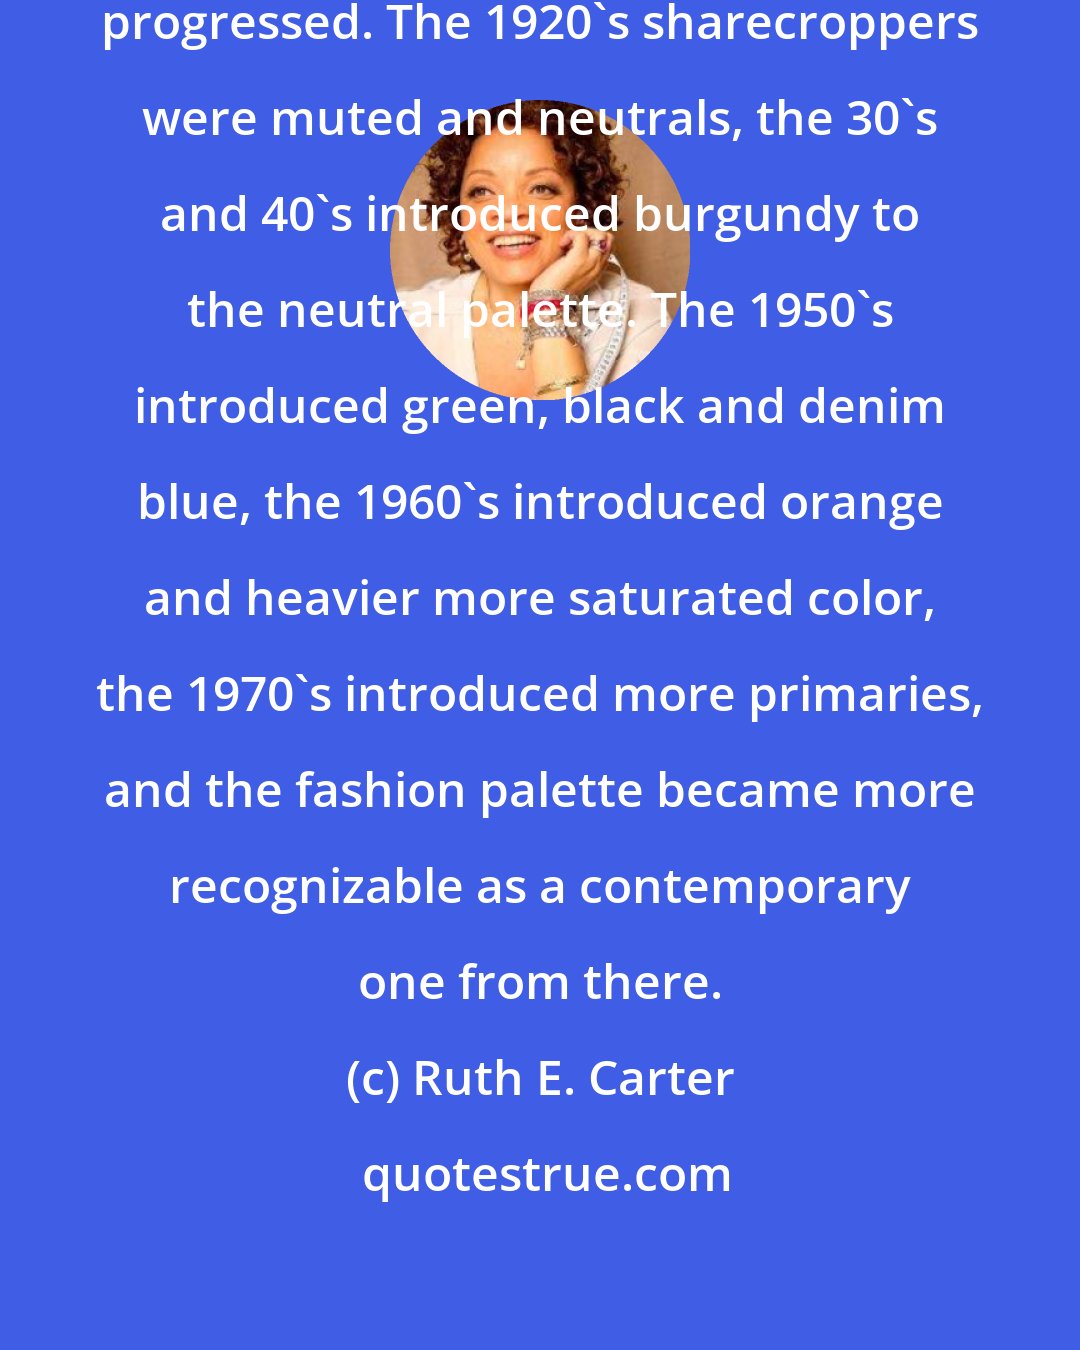 Ruth E. Carter: The color palette grew as the story progressed. The 1920's sharecroppers were muted and neutrals, the 30's and 40's introduced burgundy to the neutral palette. The 1950's introduced green, black and denim blue, the 1960's introduced orange and heavier more saturated color, the 1970's introduced more primaries, and the fashion palette became more recognizable as a contemporary one from there.